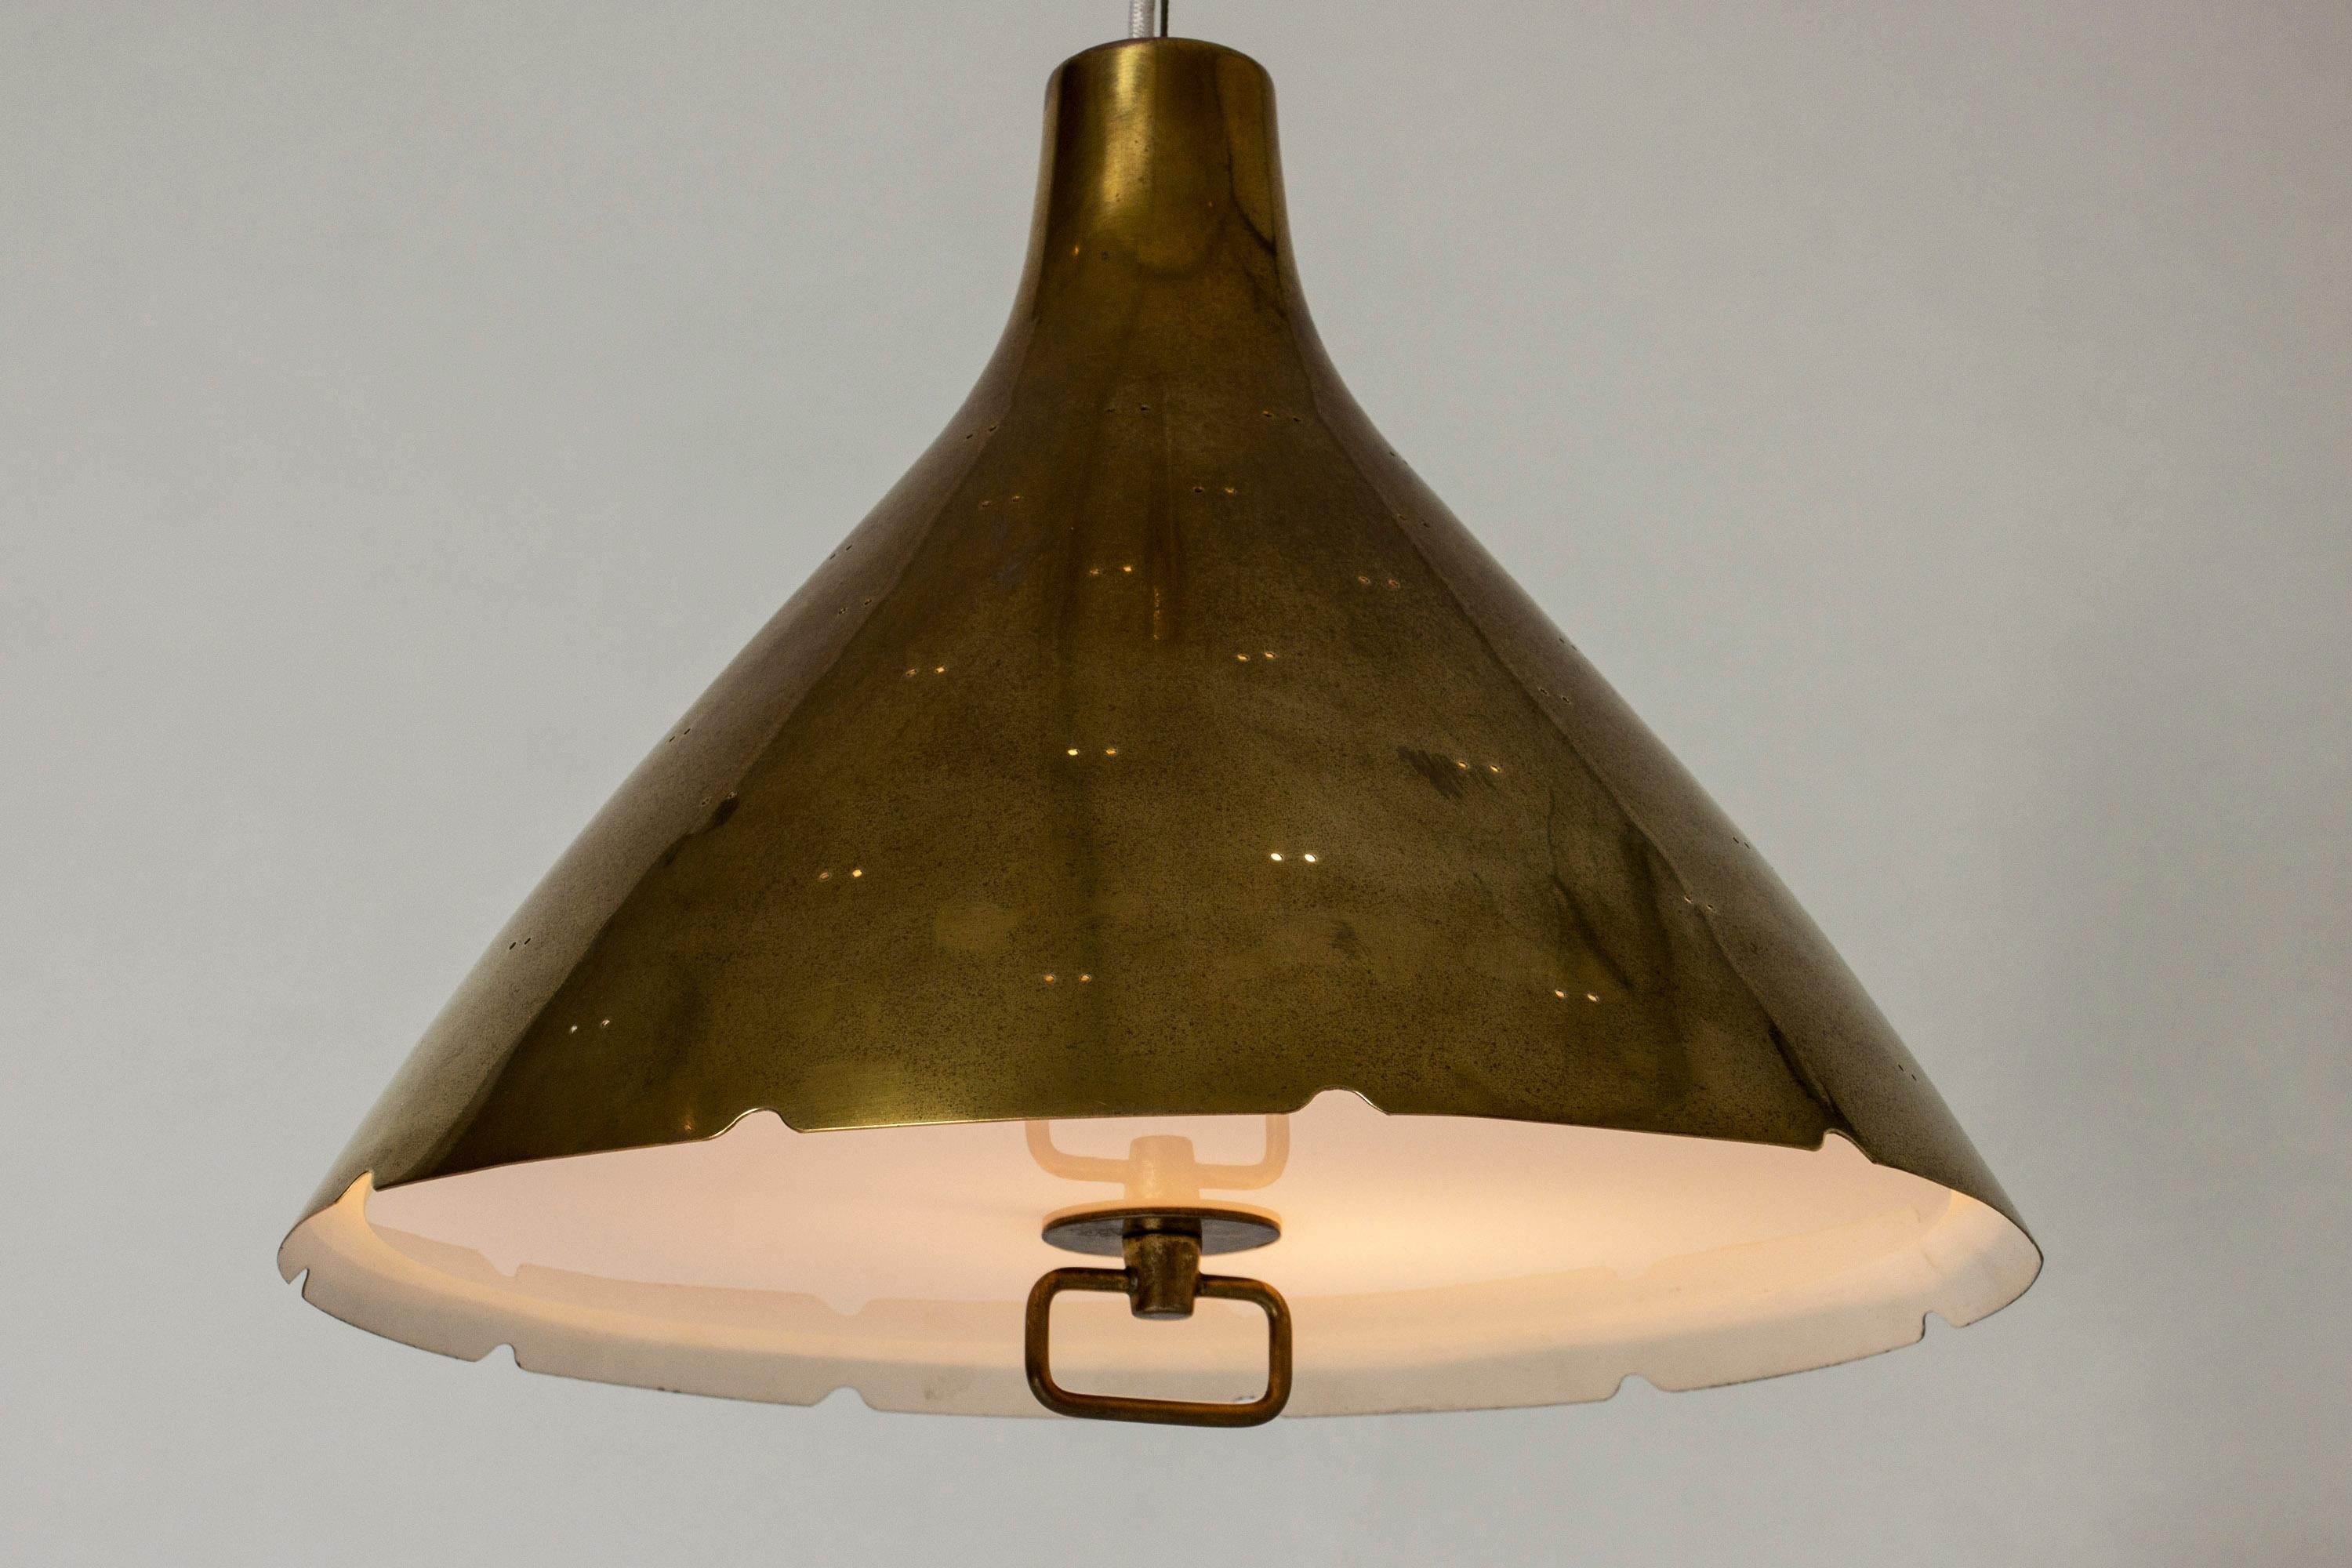 Finnish Midcentury Brass Pendant Lamp by Paavo Tynell for Taito Oy, Finland, 1950s For Sale